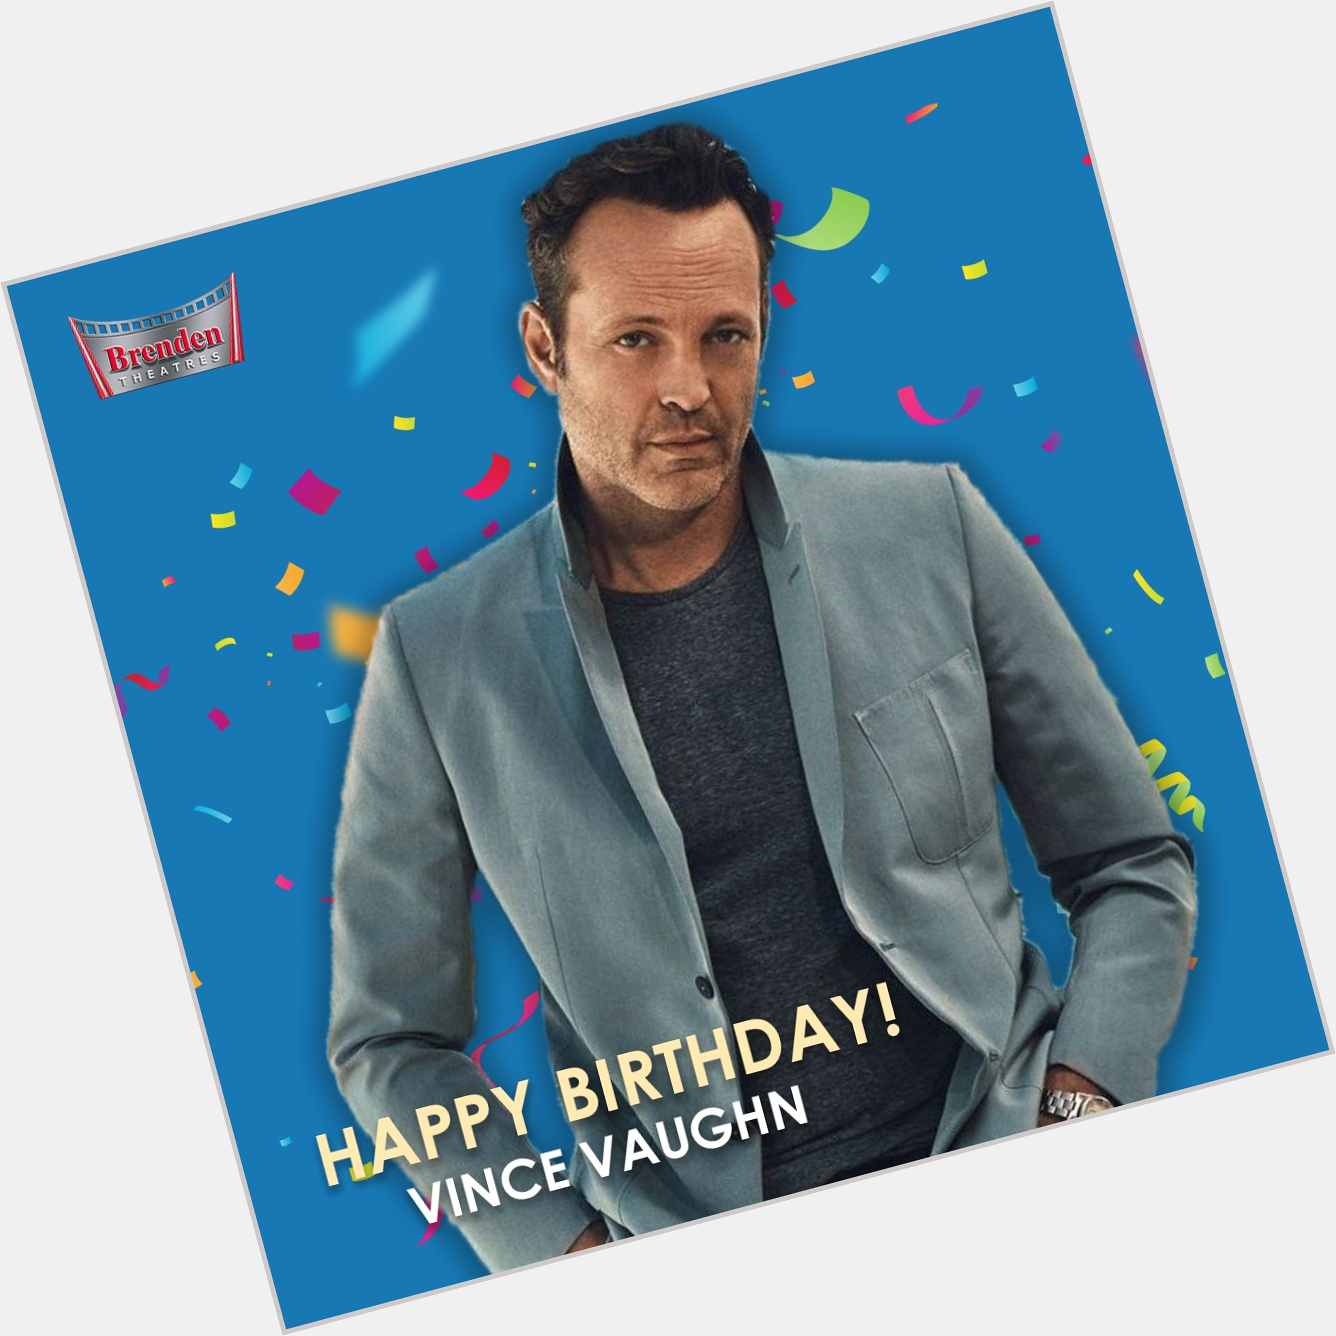 This actor from Wedding Crashers and much more turns 50 today Happy Birthday to Vince Vaughn! 